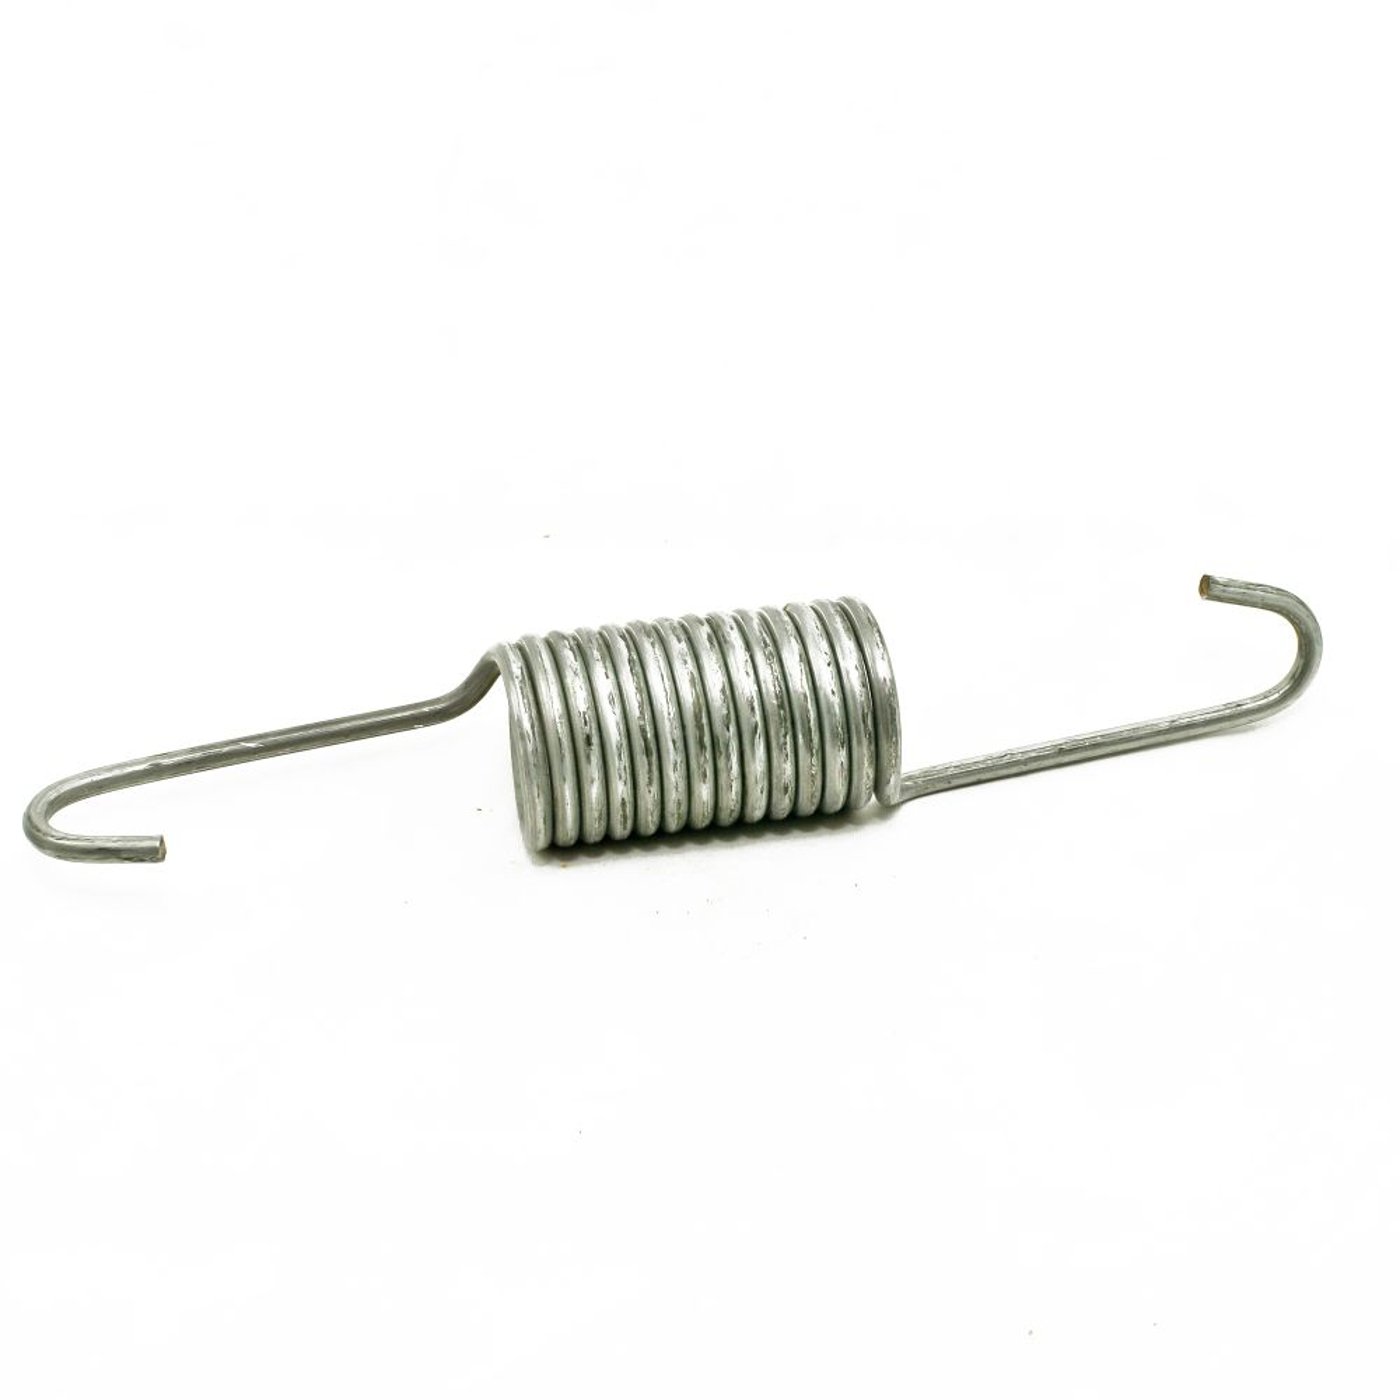 Washer Suspension Spring 00491683 parts | Sears PartsDirect